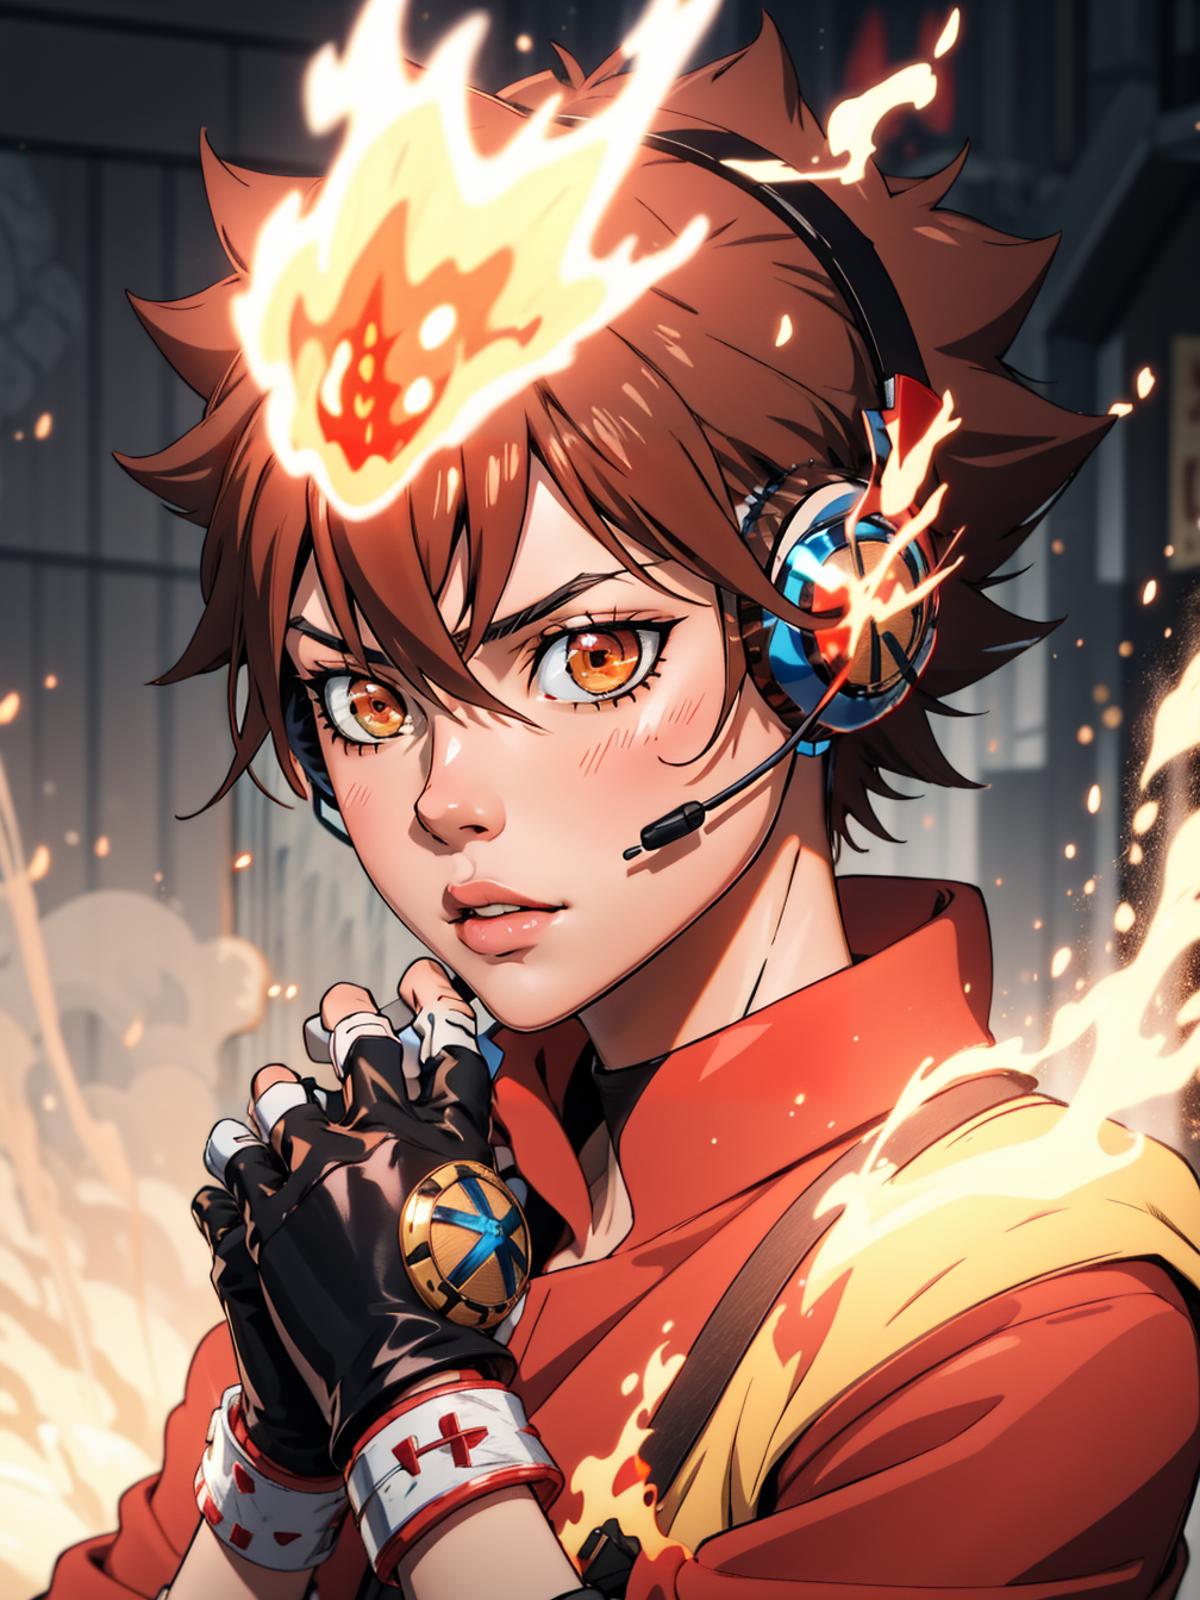 A woman with headphones and a flame on her head.